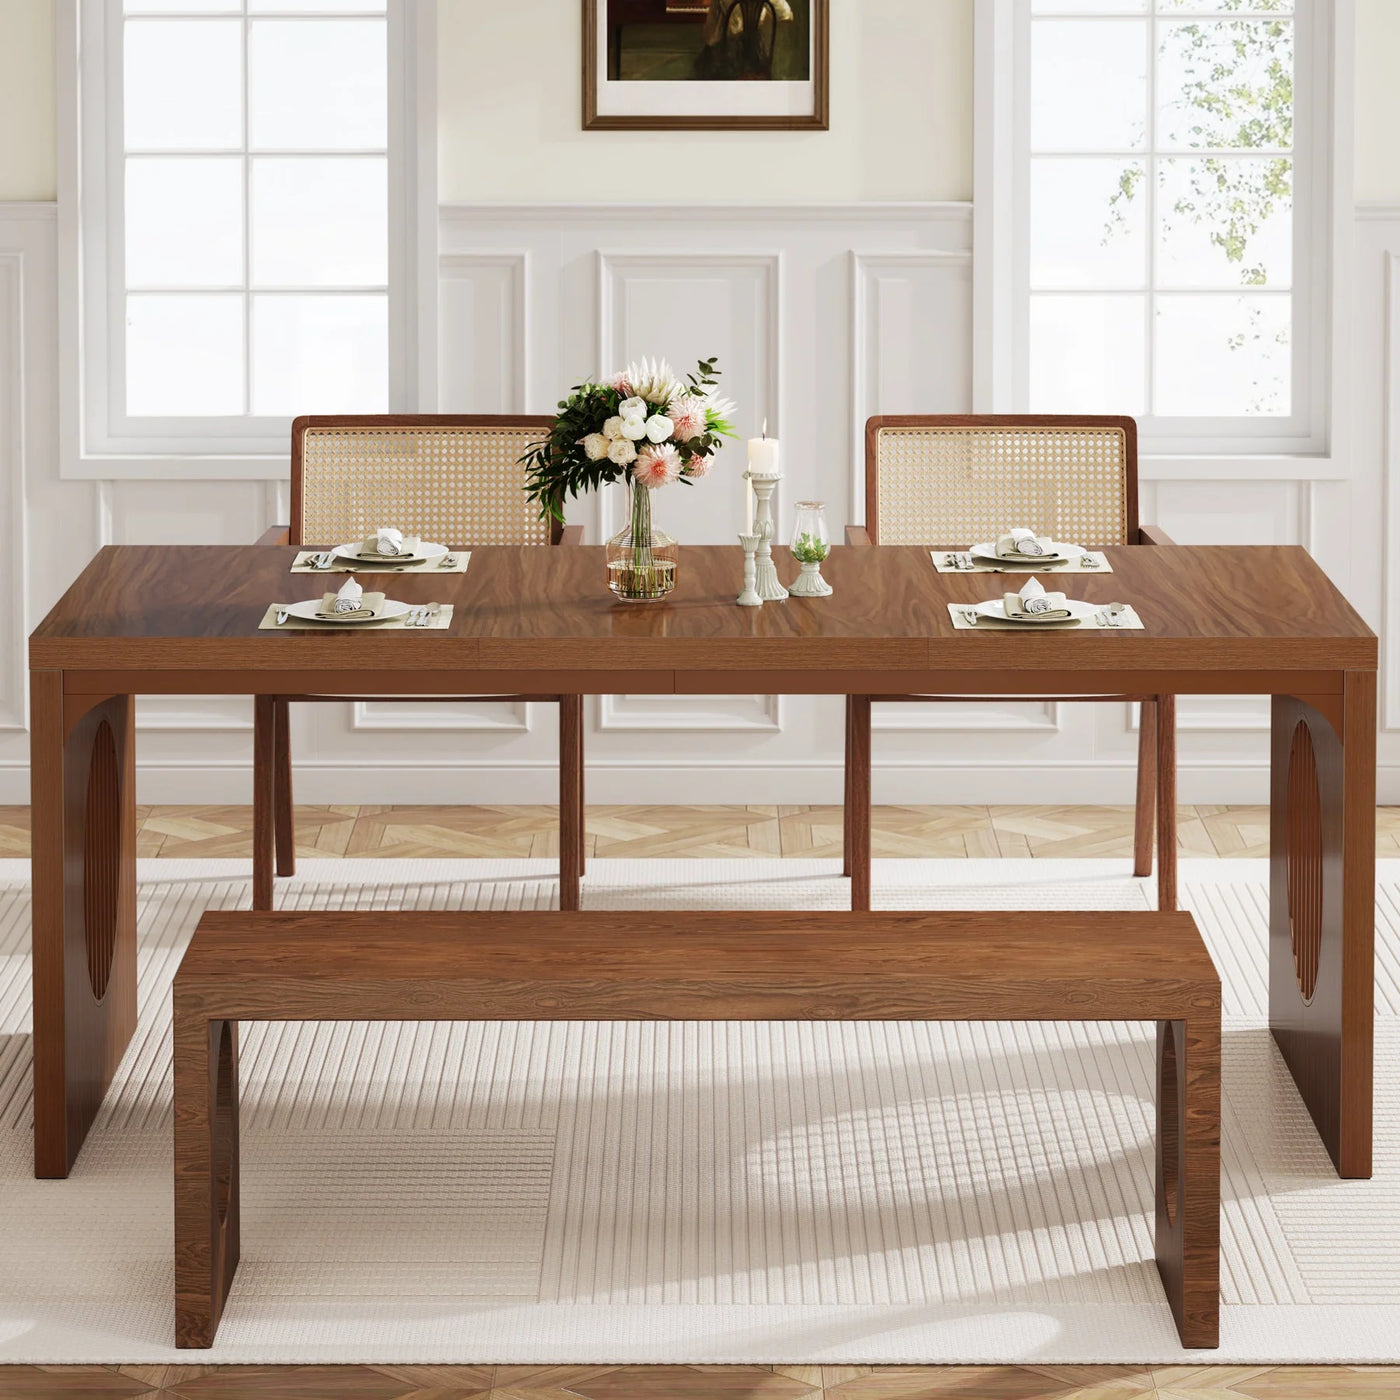 Beau Rectangular Dining Table | Wood Farmhouse Kitchen Table For 4-6